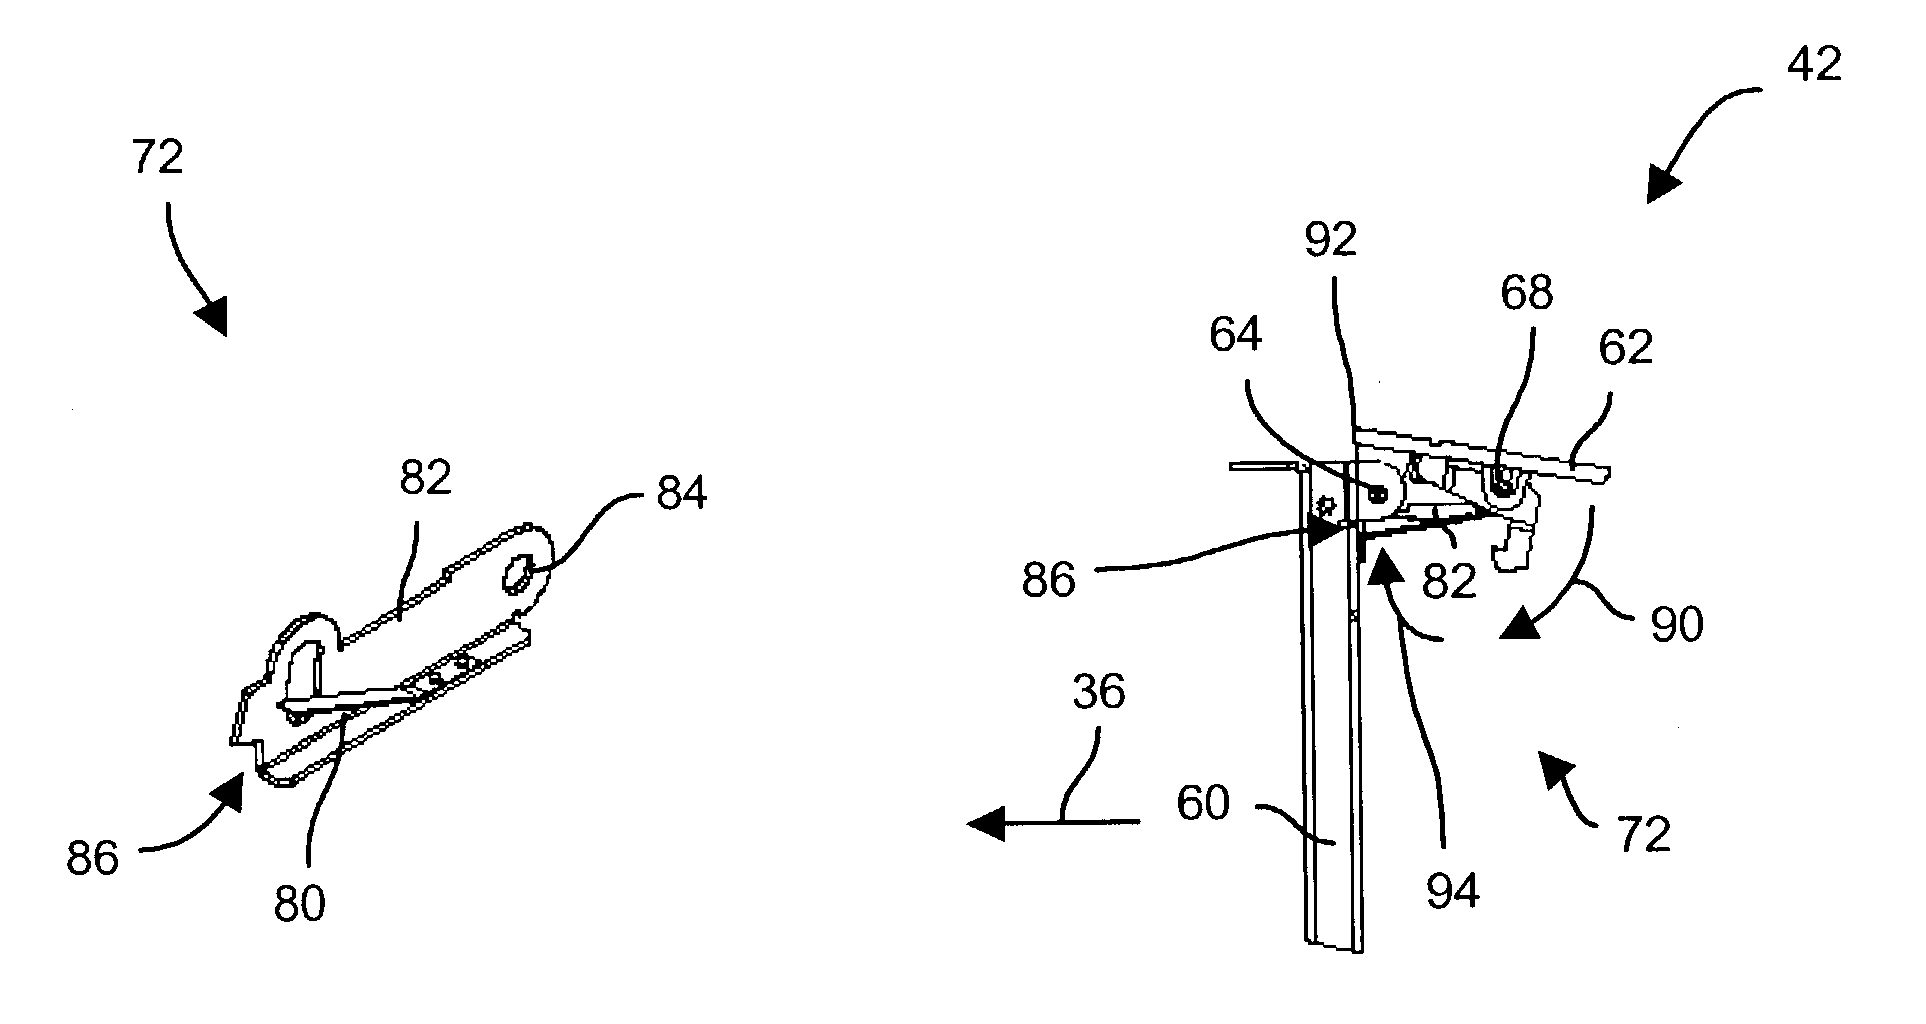 Systems and methods for installing a circuit board assembly utilizing an insertion delay latch